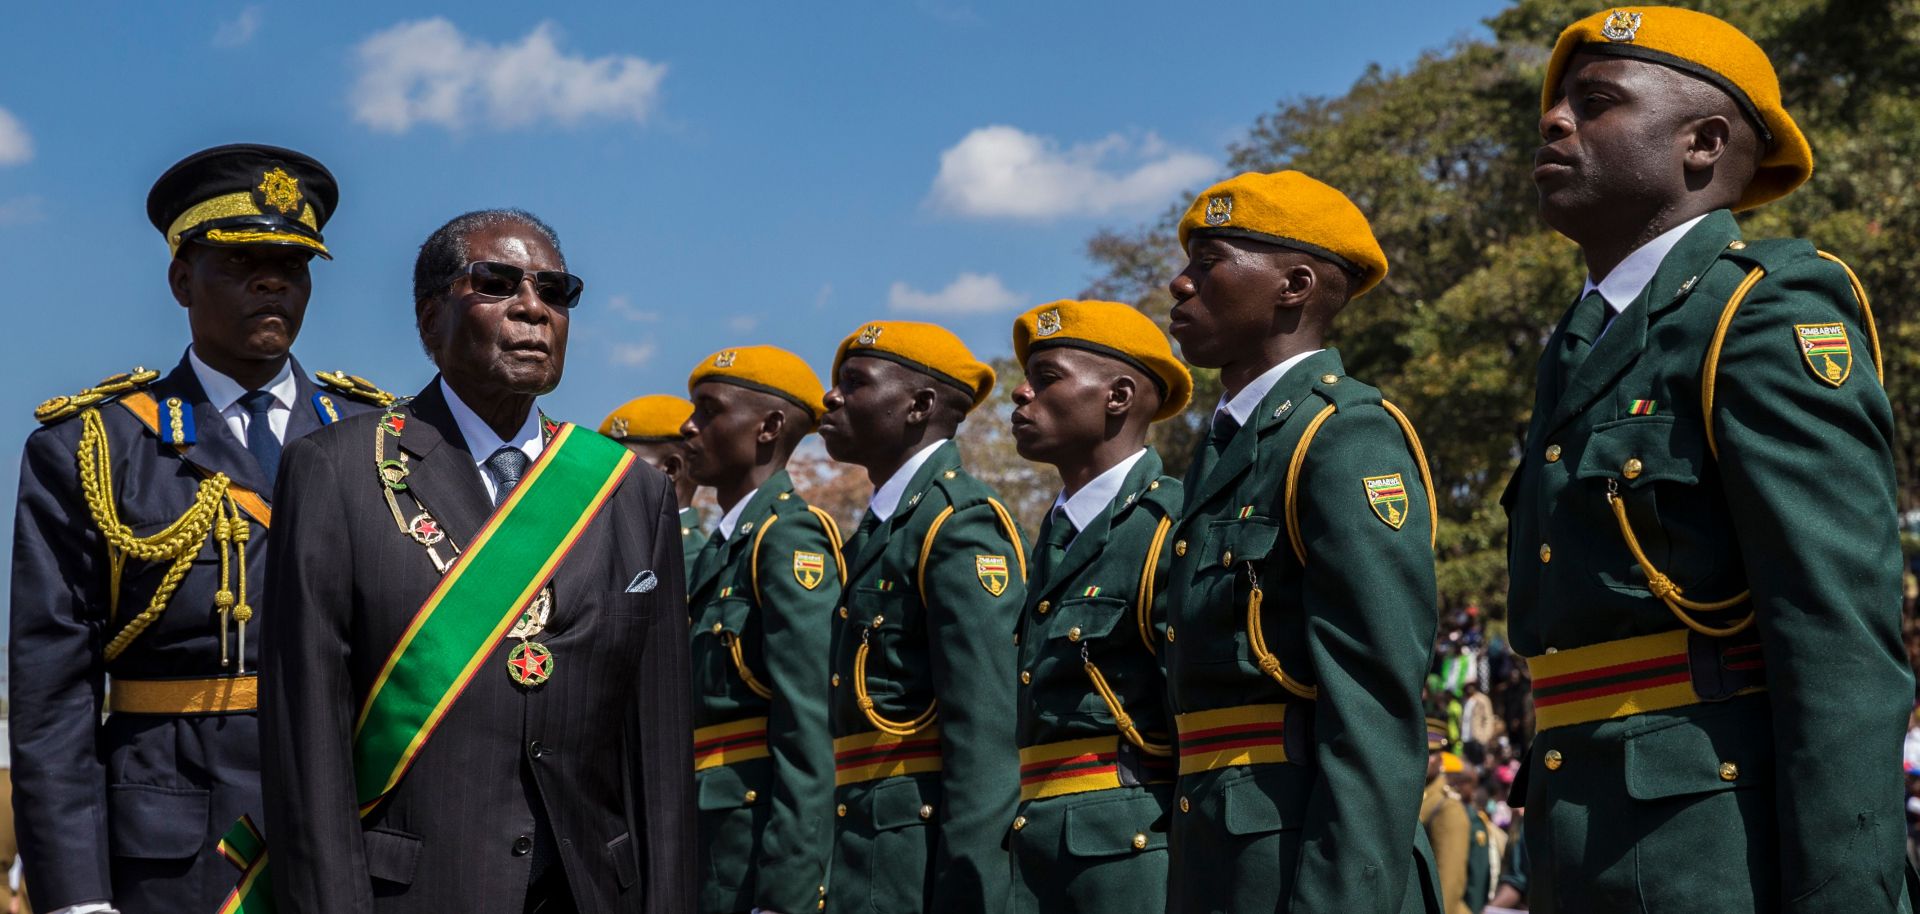 Zimbabwean President Robert Mugabe (in the green sash) inspects a guard of honor during official Heroes Day commemorations held at National Heroes Acre in Zimbabwe, Aug. 14.